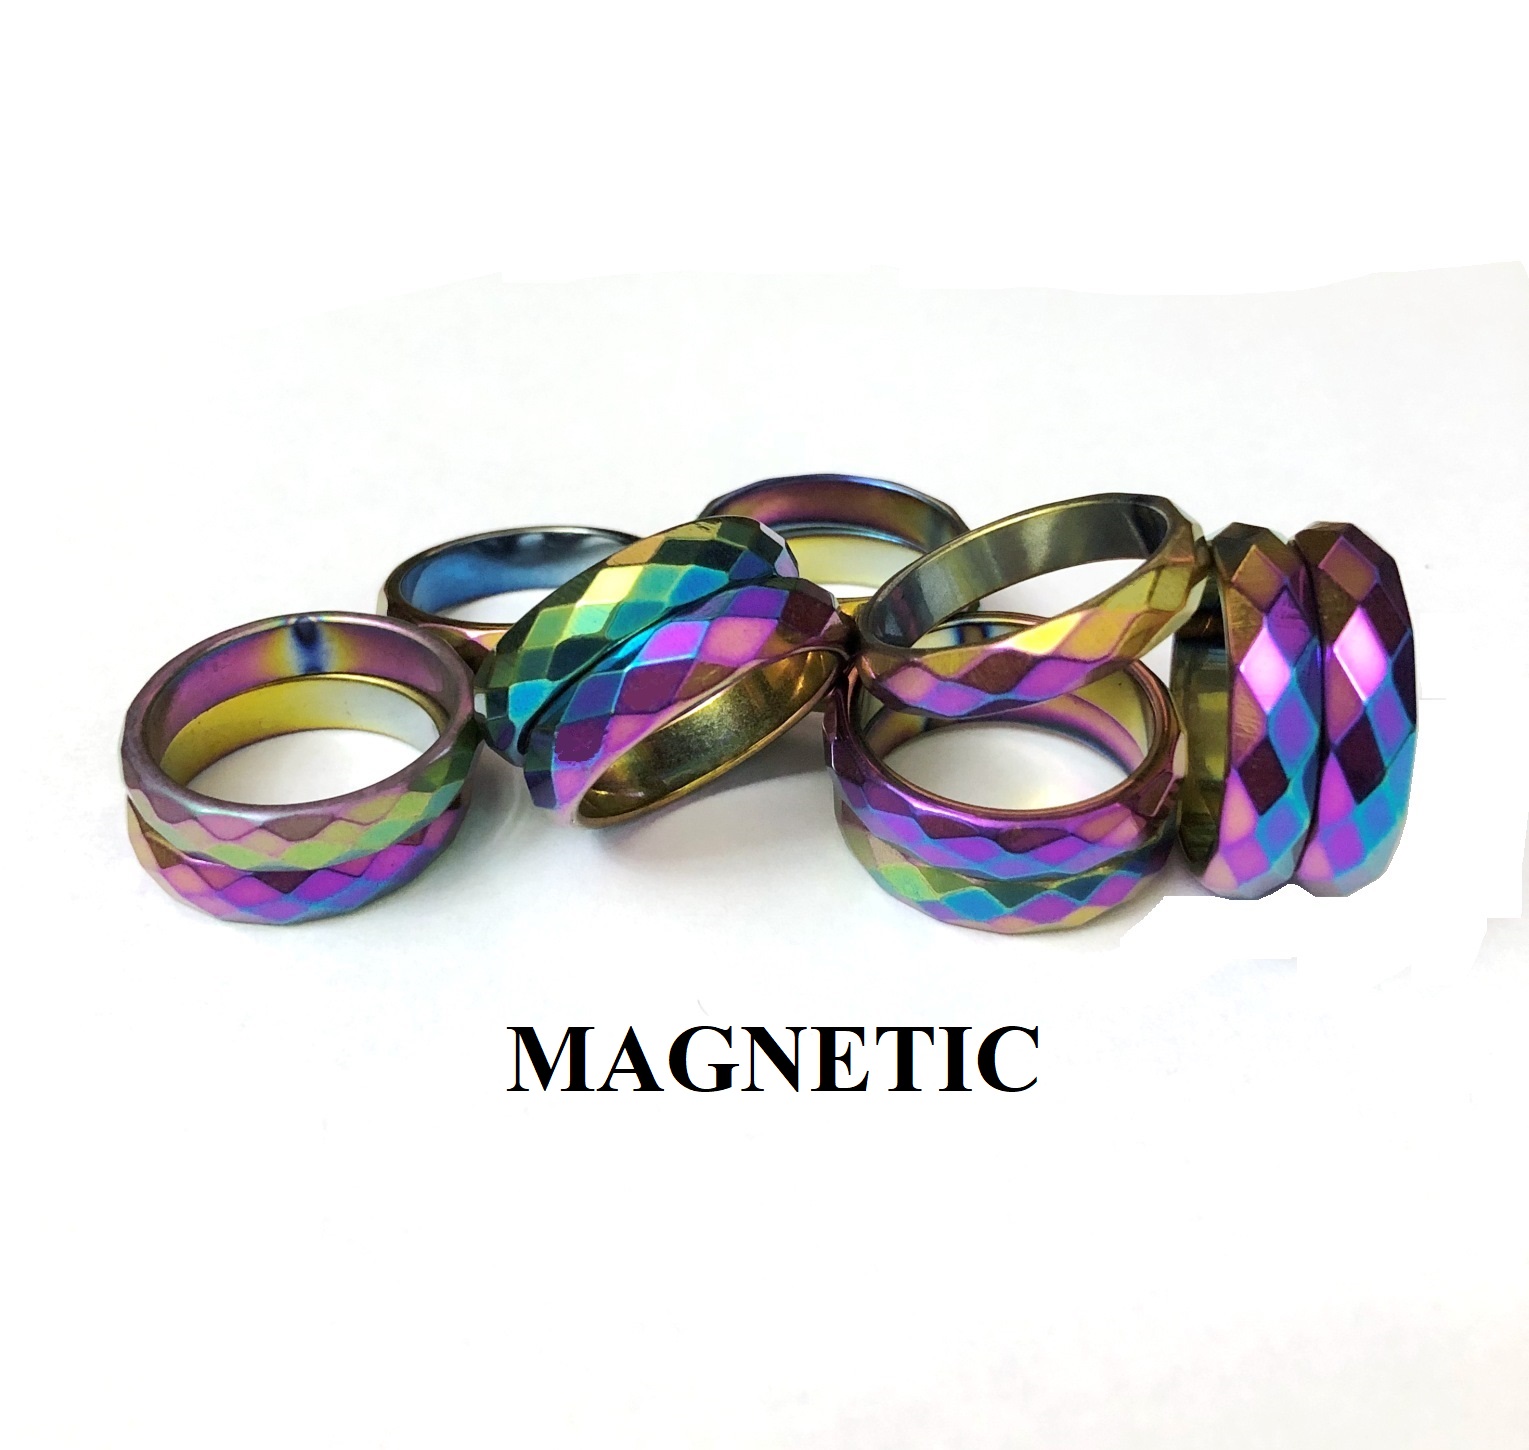 100 PC. MAGNETIC Faceted 6mm Diamond Cut Rainbow Hematite Rings Mixed Sizes #RR1654-812-100